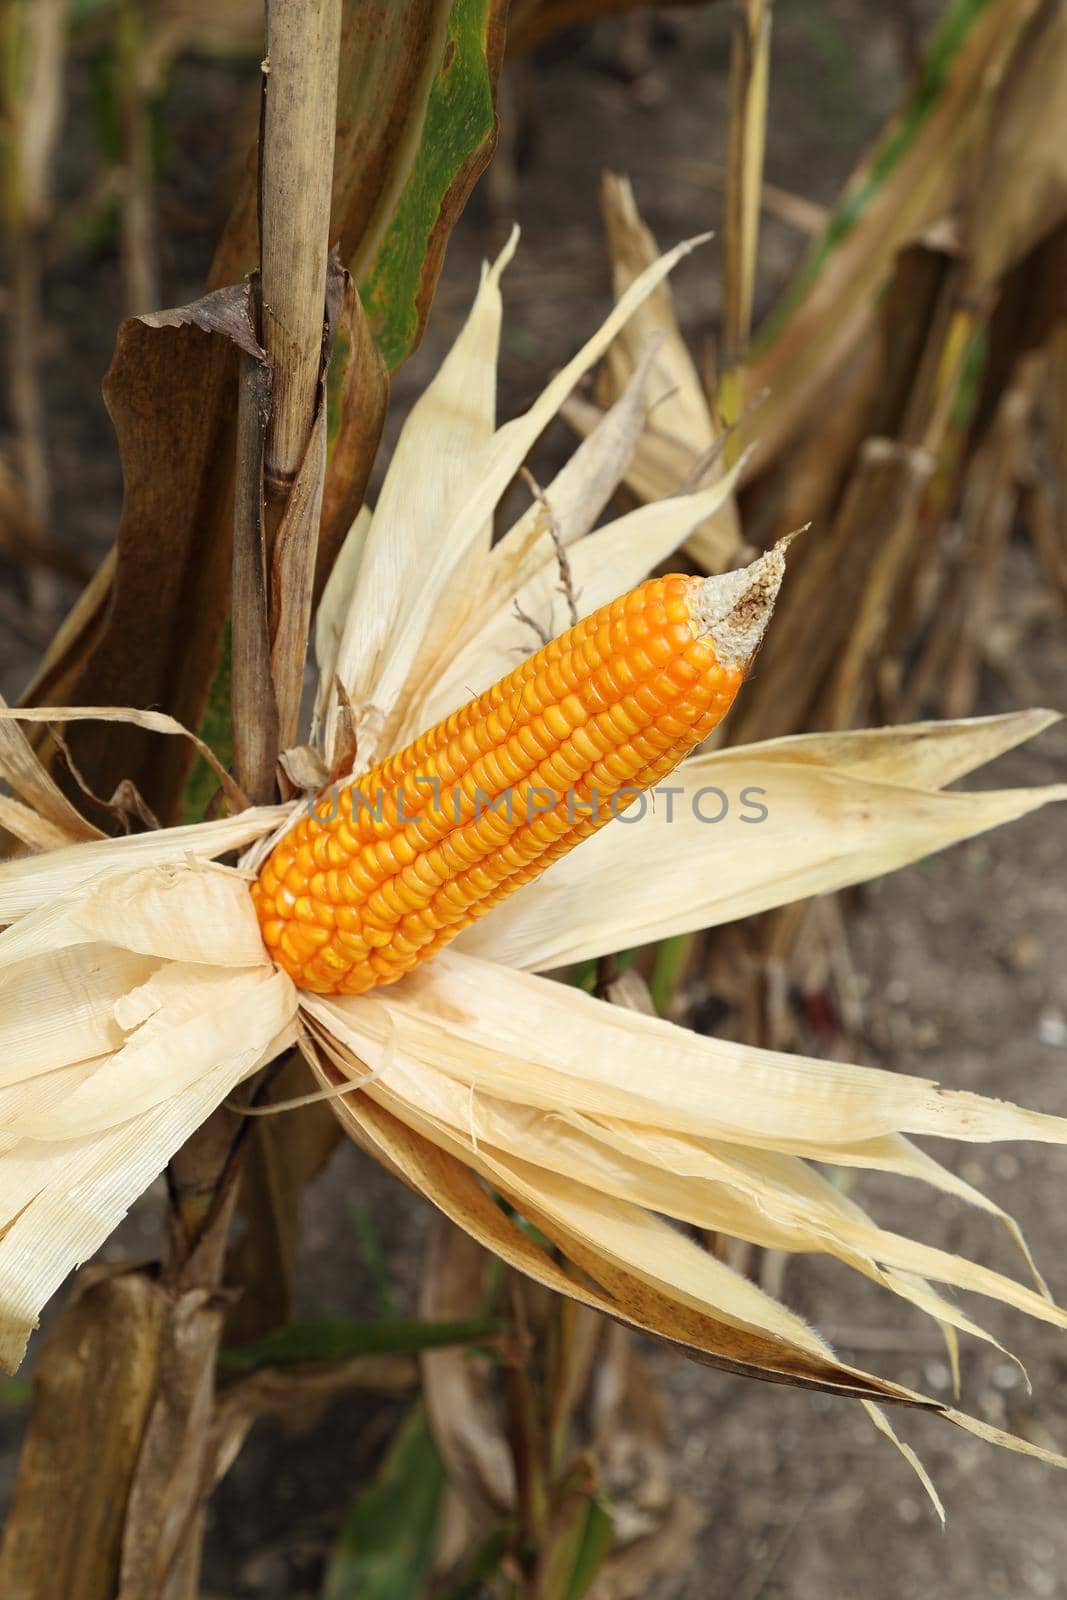 Corn on the stalk in the field, Thailand